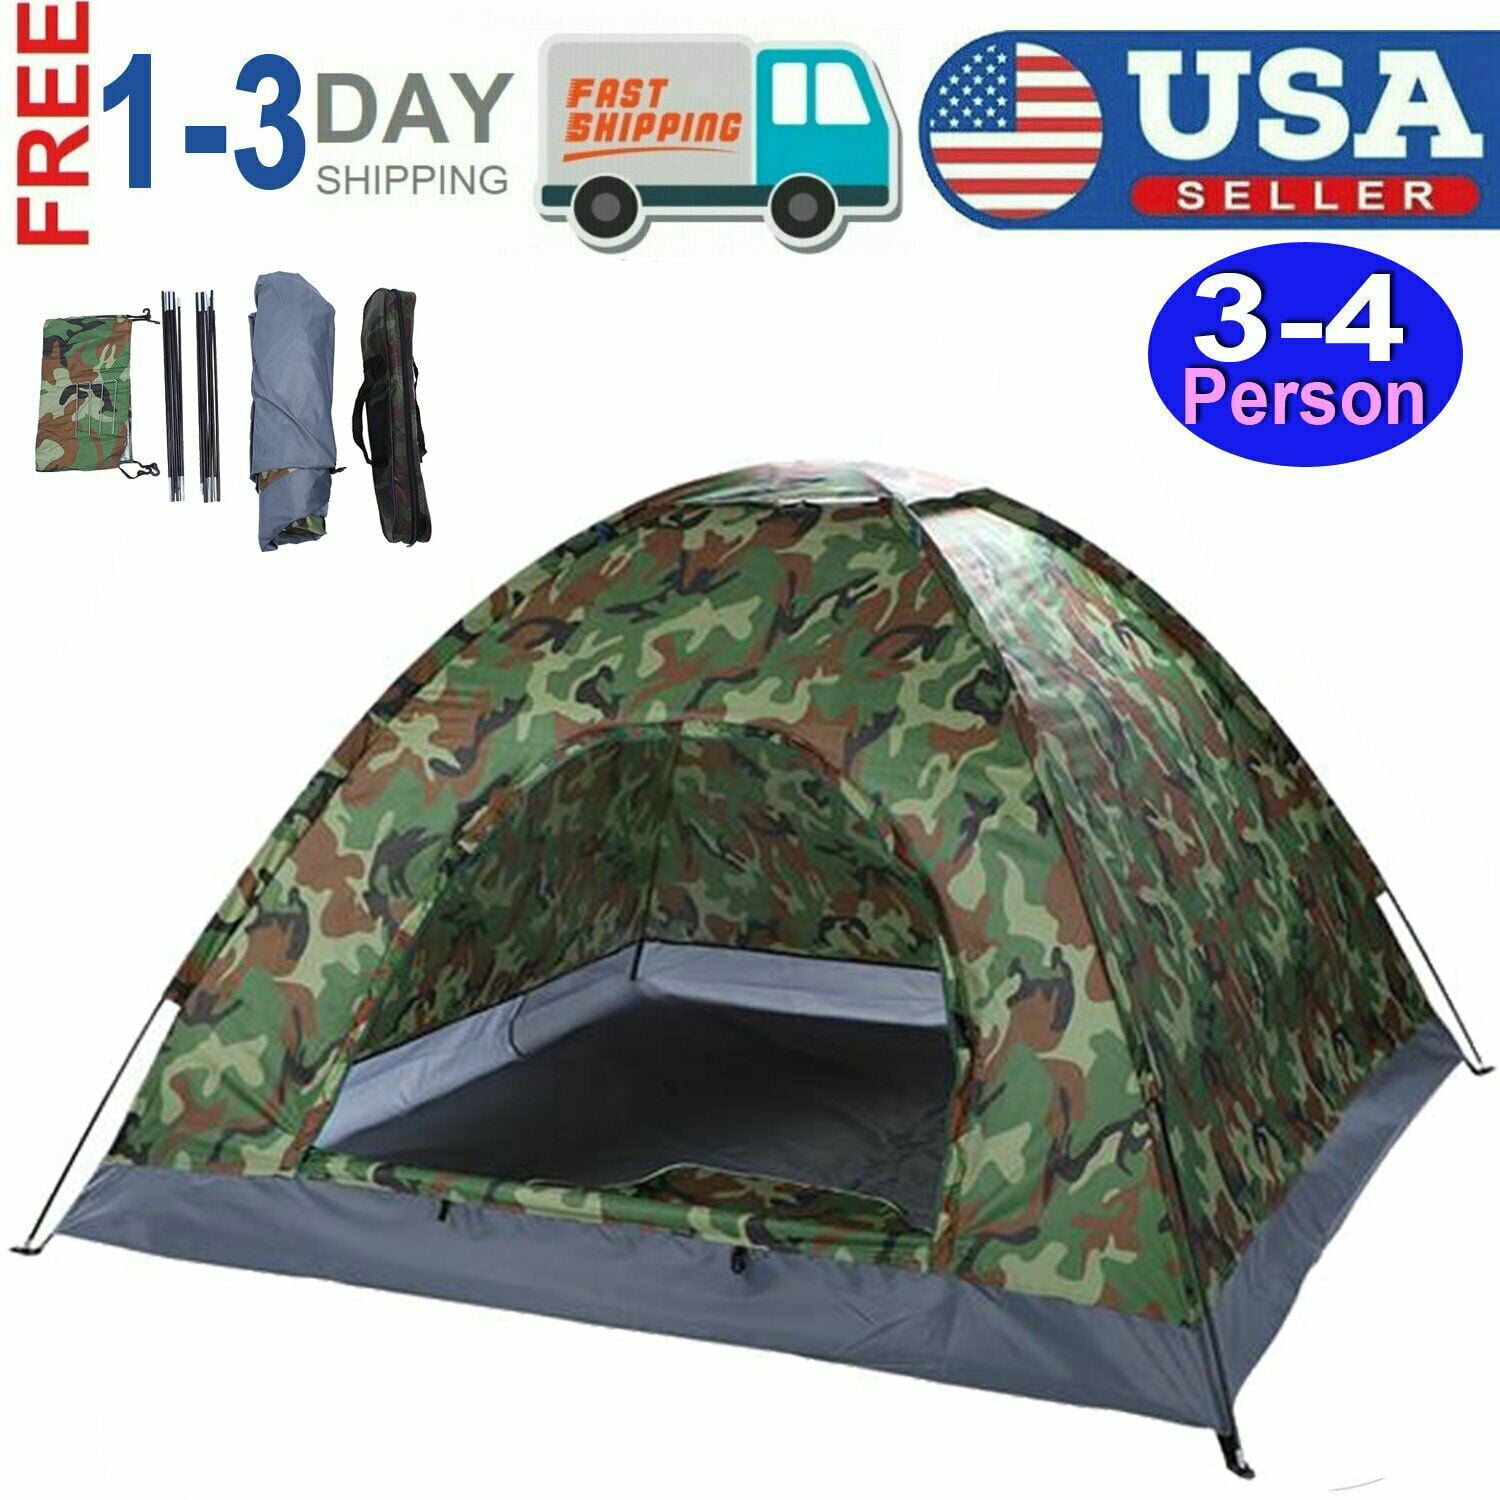 USA Camouflage 3-4 Person Outdoor Camping Dome Waterproof Tent Hiking Folding 